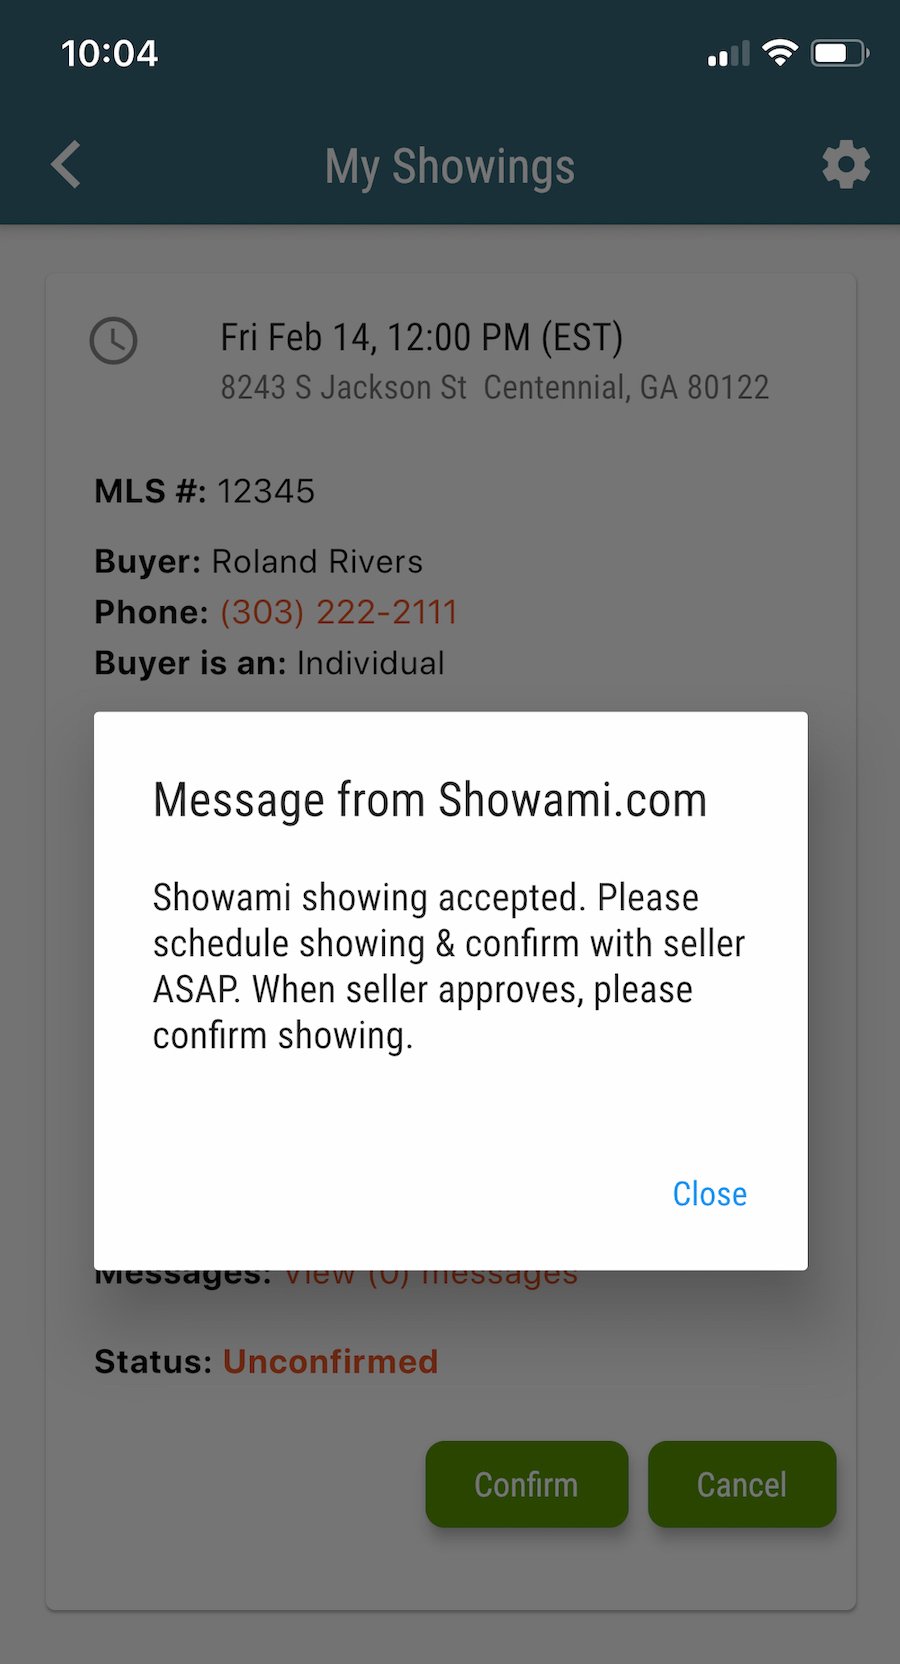 Showami showing accepted in app message